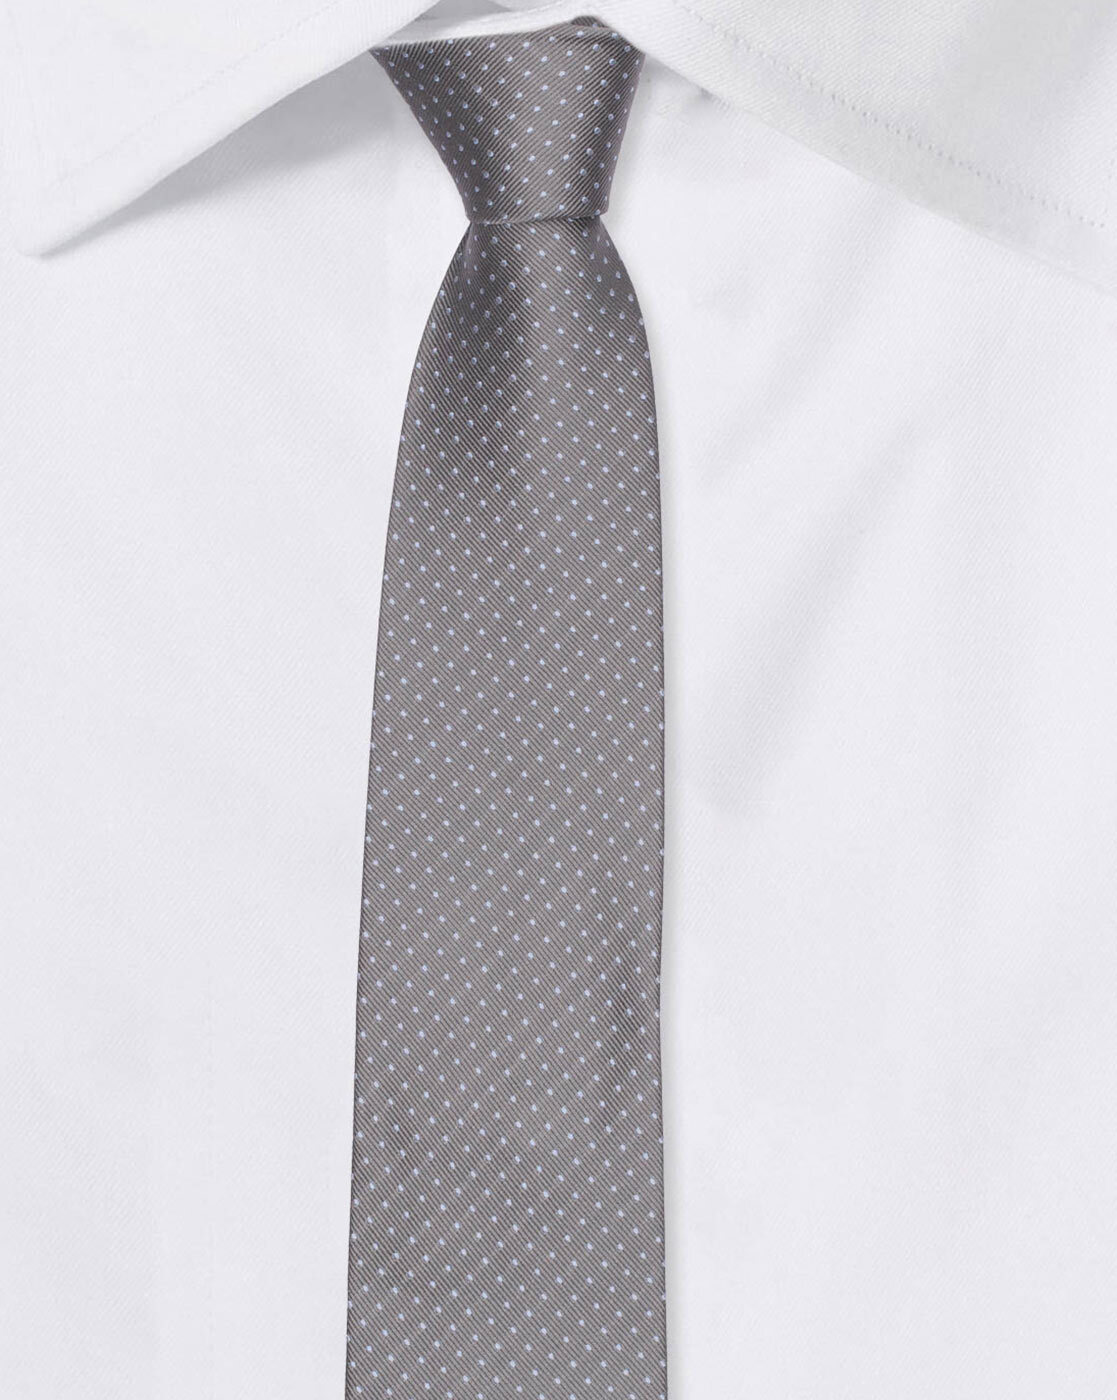 RIXON GROOVE (LIMITED EDITION) MEN'S TIE 100% Polyester MADE IN